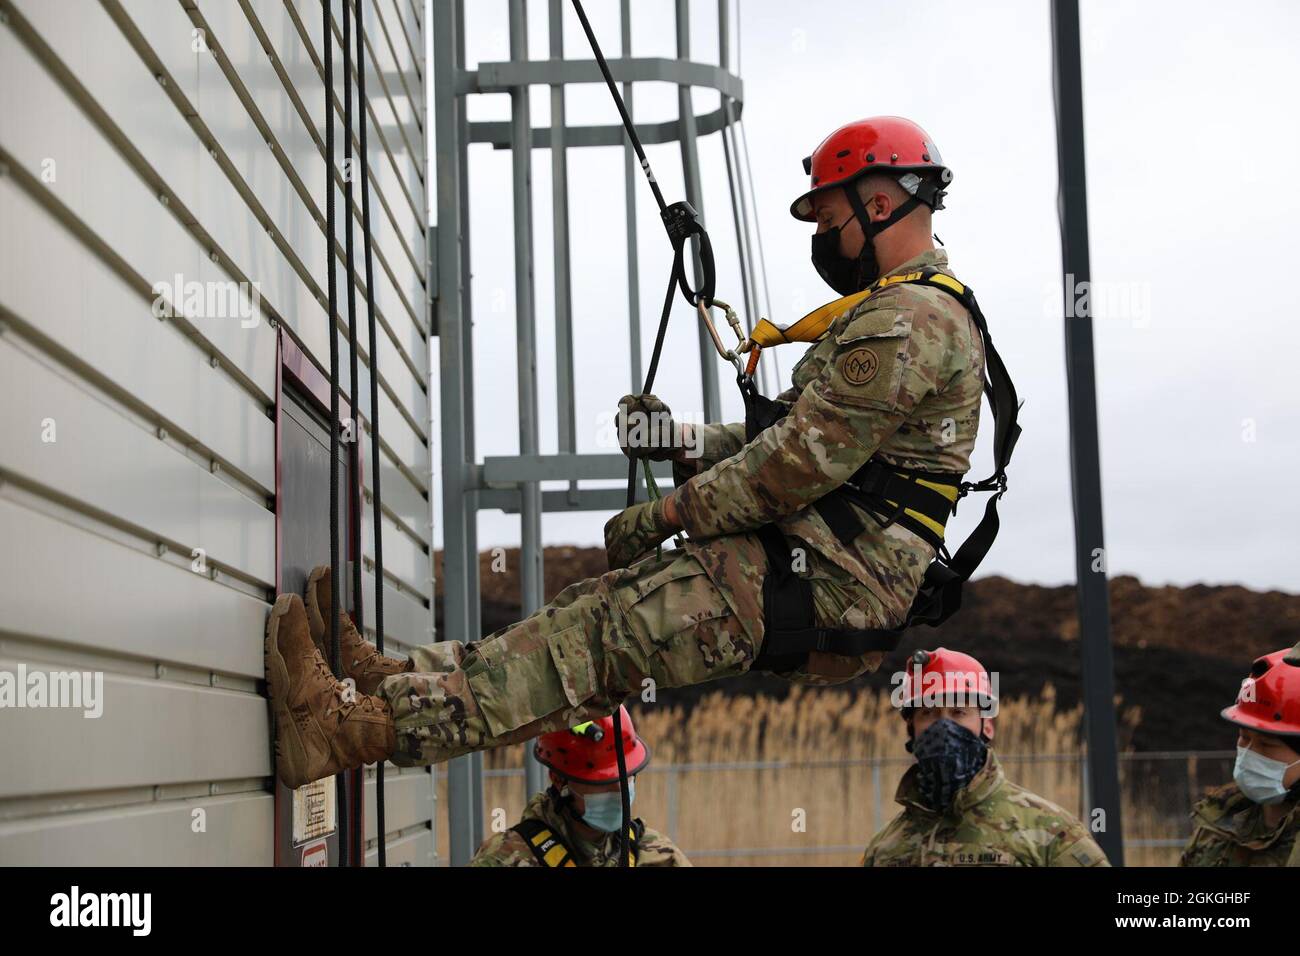 Staff Sgt. Joshua Kaczmarek, a combat engineer assigned to Bravo Company, 152nd Brigade Engineer Battalion of the New York Army National Guard, practices ascending a building by rope during a Homeland Response Force collective training extercise in East Amherst, New York on April 16. Kaczmarek is assigned to the search and extraction element of the FEMA Region II Homeland Response Force. Stock Photo